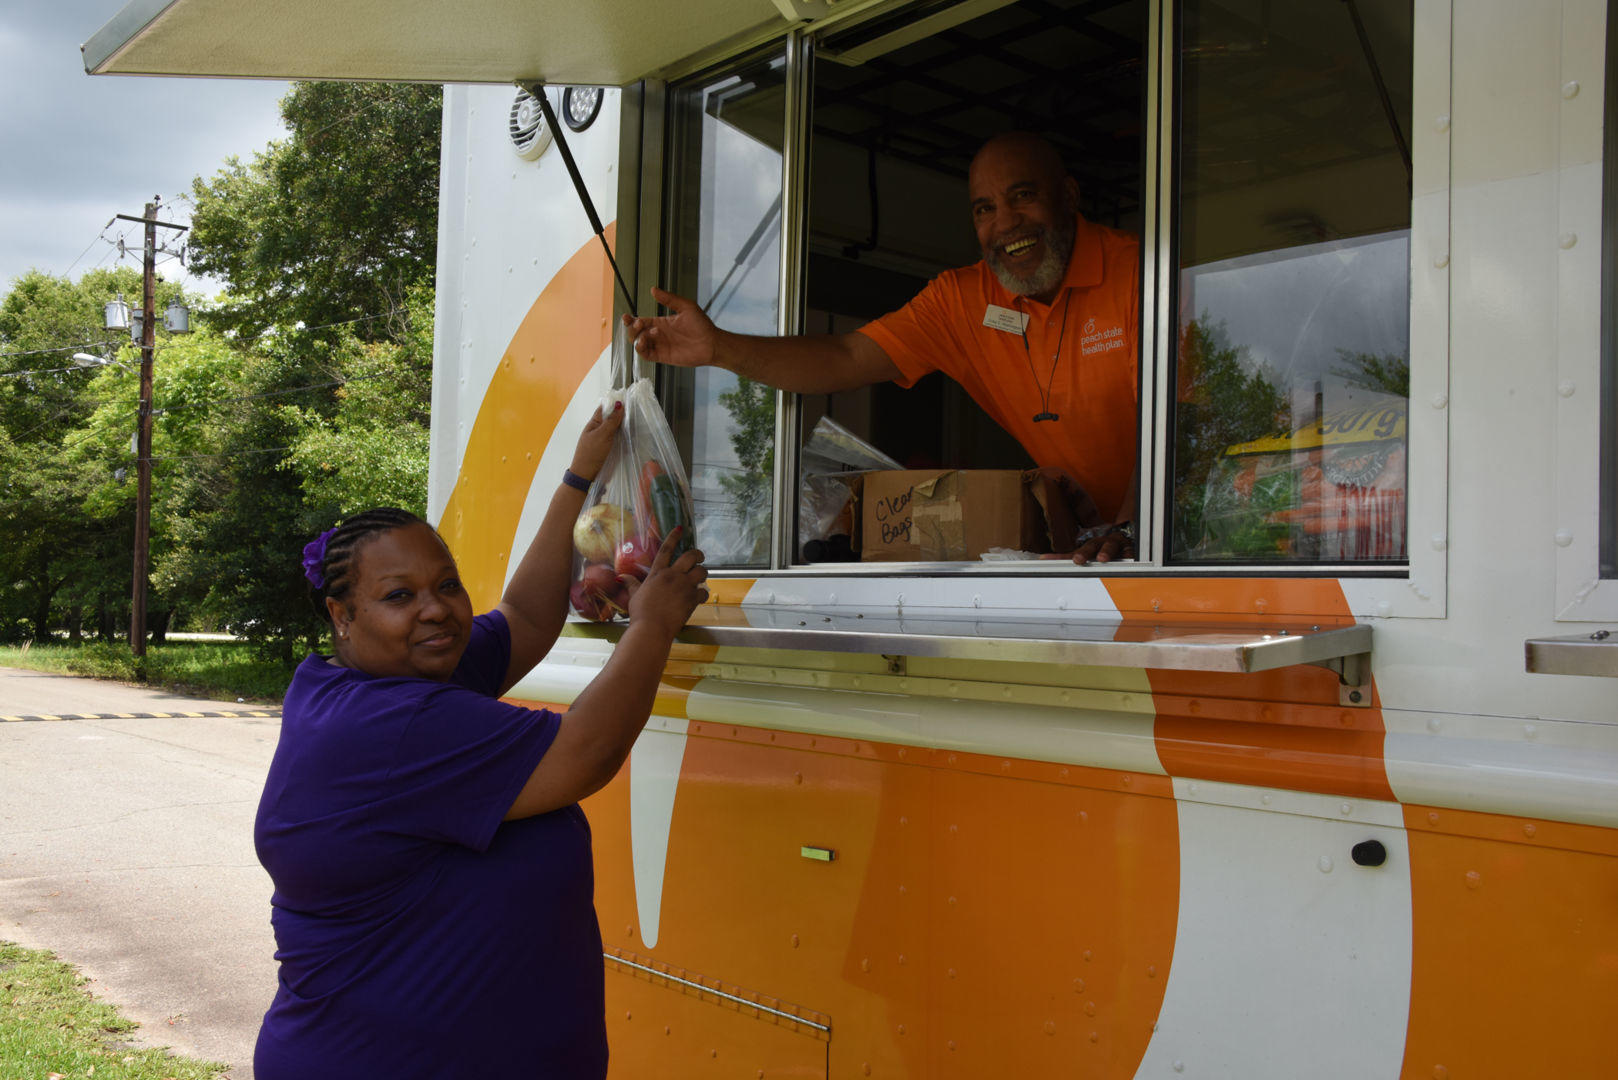 Craig Washington (right), the community coordinator for the Peach State Health Plan, delivers a bag of fresh fruits and vegetables to DeVona Robinson (left) during the Peach State Health Plan’s Mobile Market visit to Fort Valley on May 31.